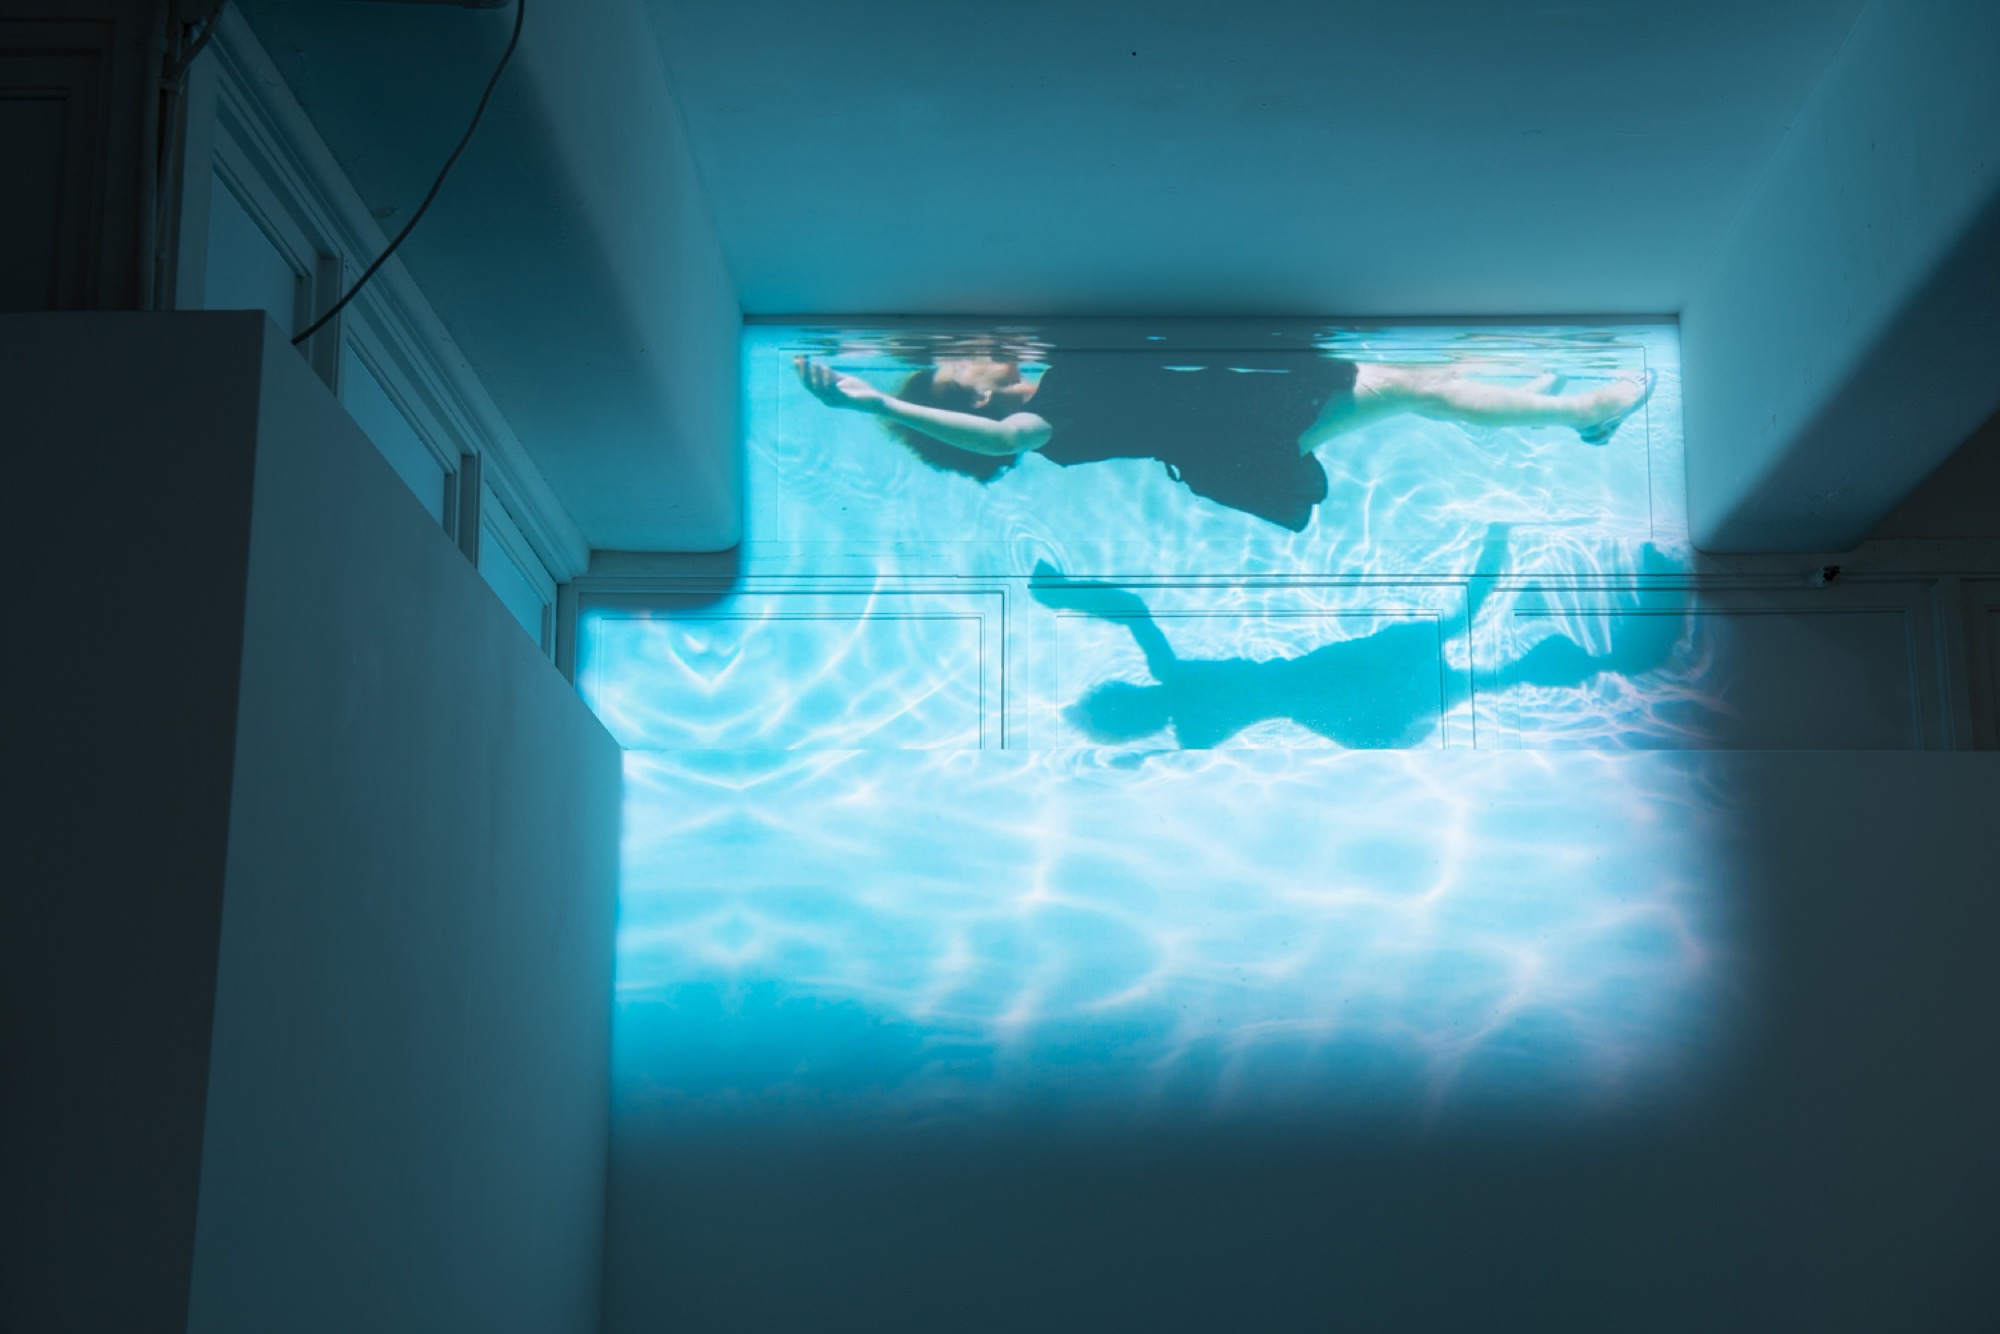 Yandell Walton, <em>Submerged</em>, 2017. Projection installation, continuous loop. Installation view, BLINDSIDE Gallery, Melbourne. Photograph Nick James Archer